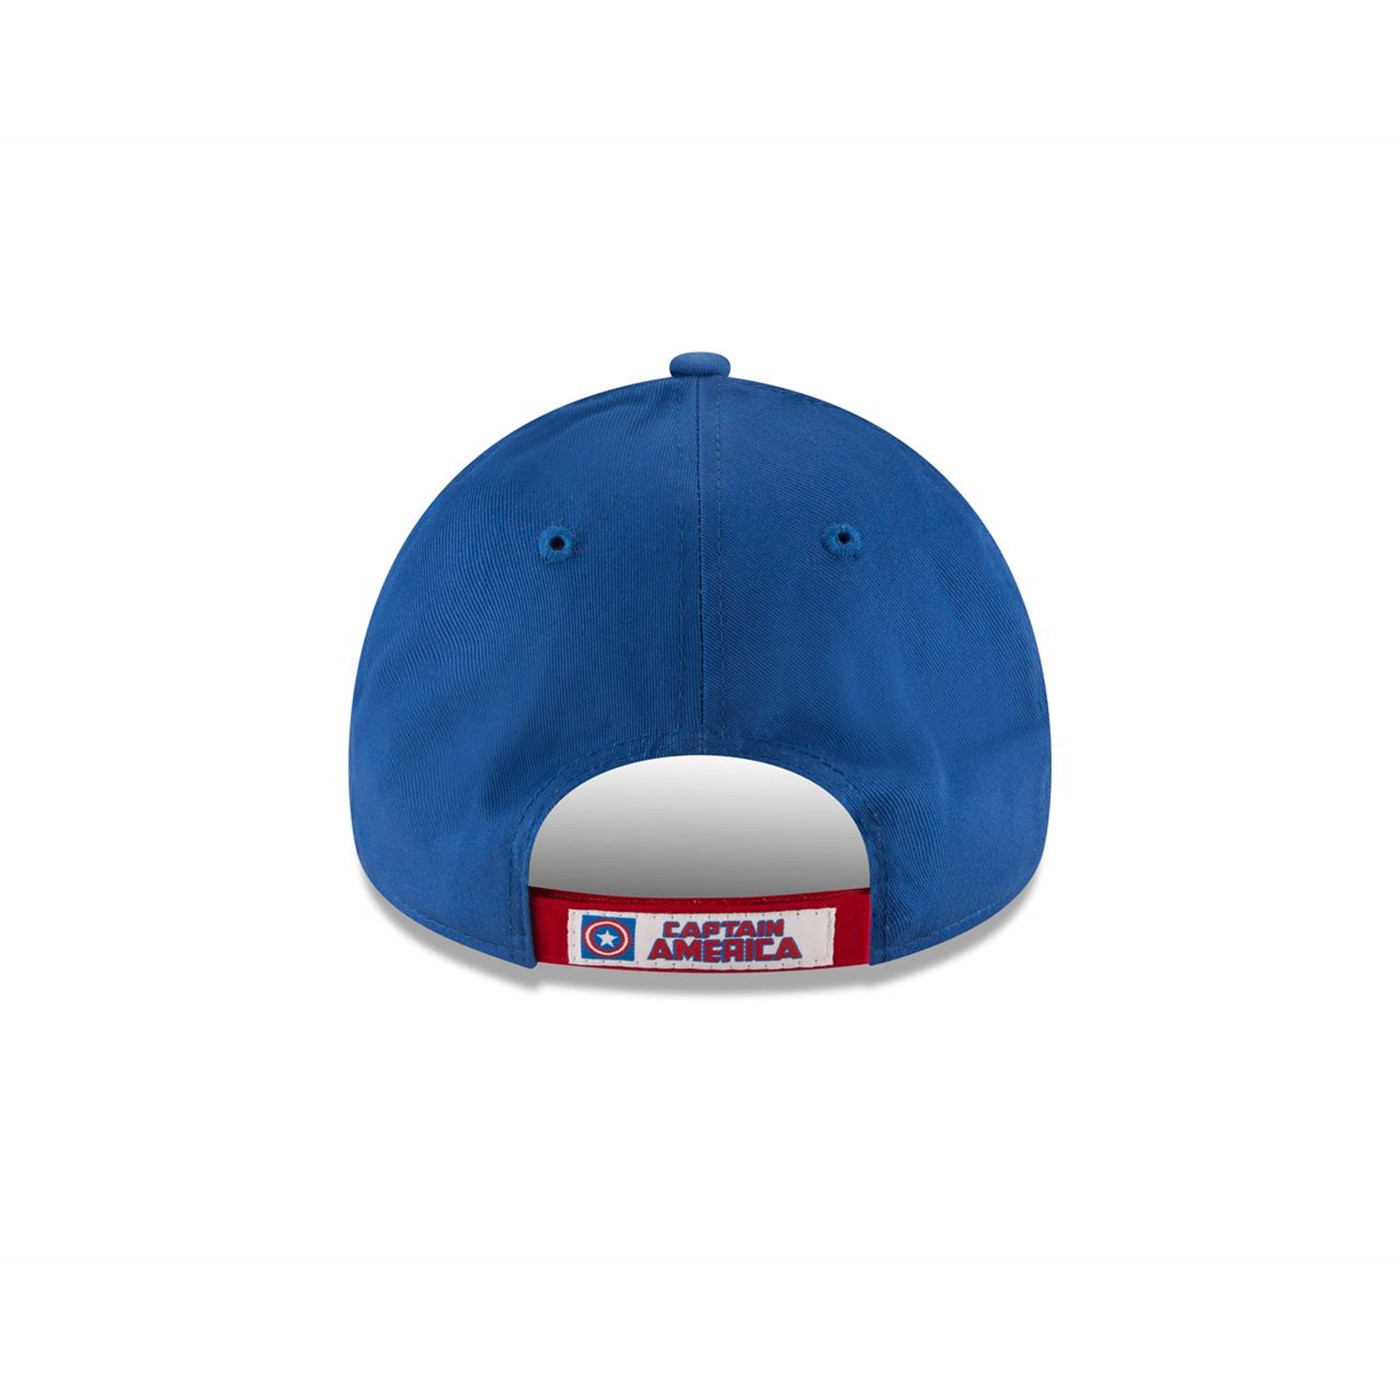 Captain America Symbol with Text Brim New Era 9Forty Adjustable Hat